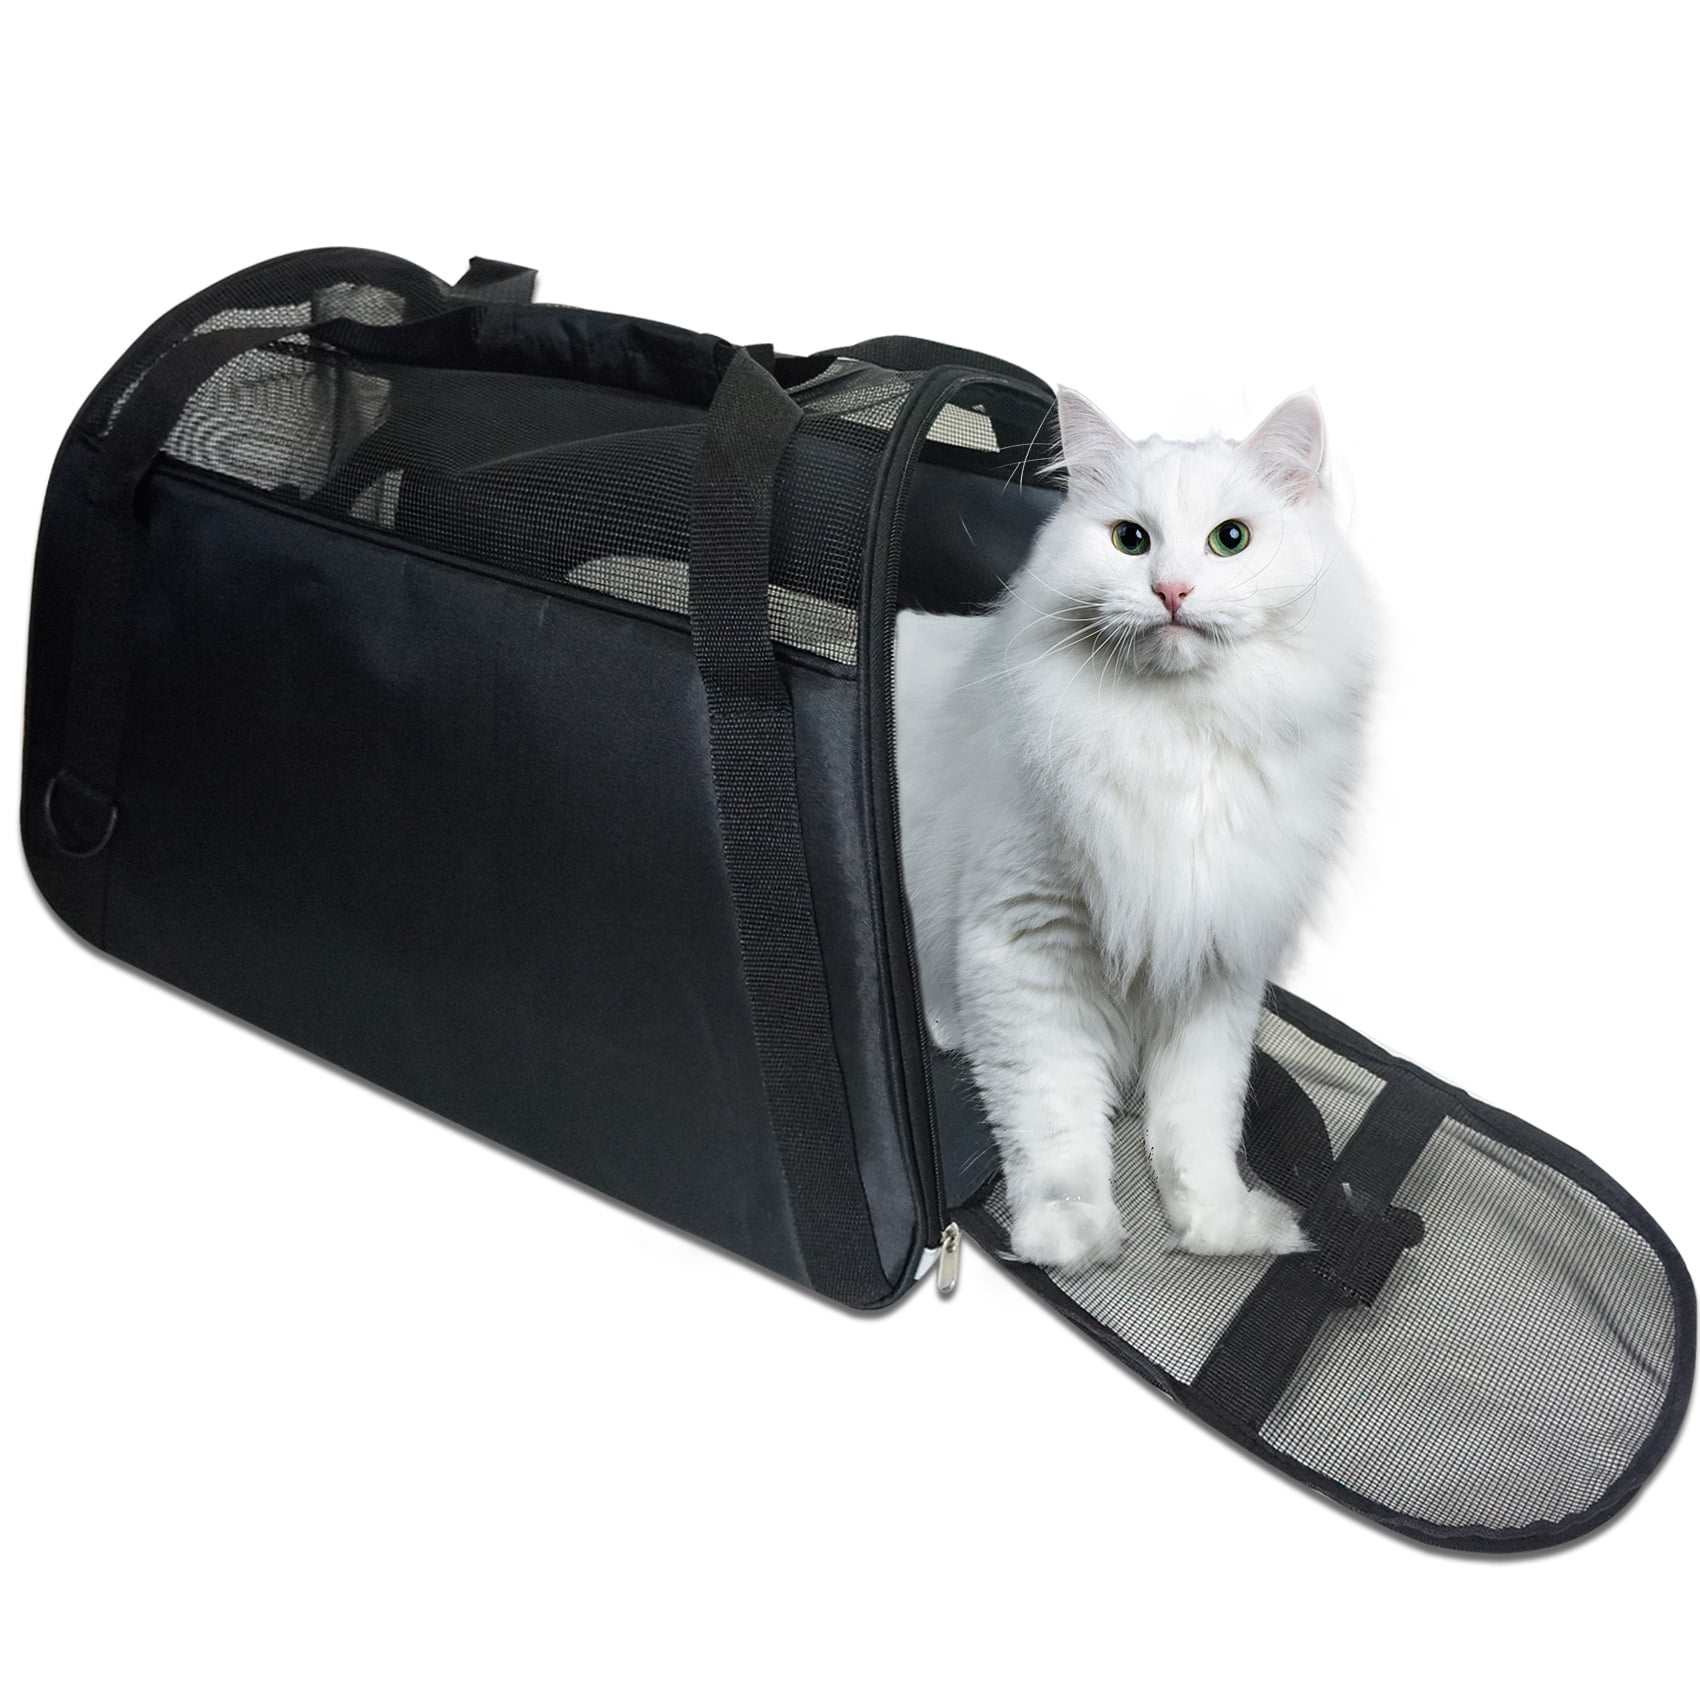 Carrier Bag for Cats - Extremely Easy Vet Visits & Grooming!